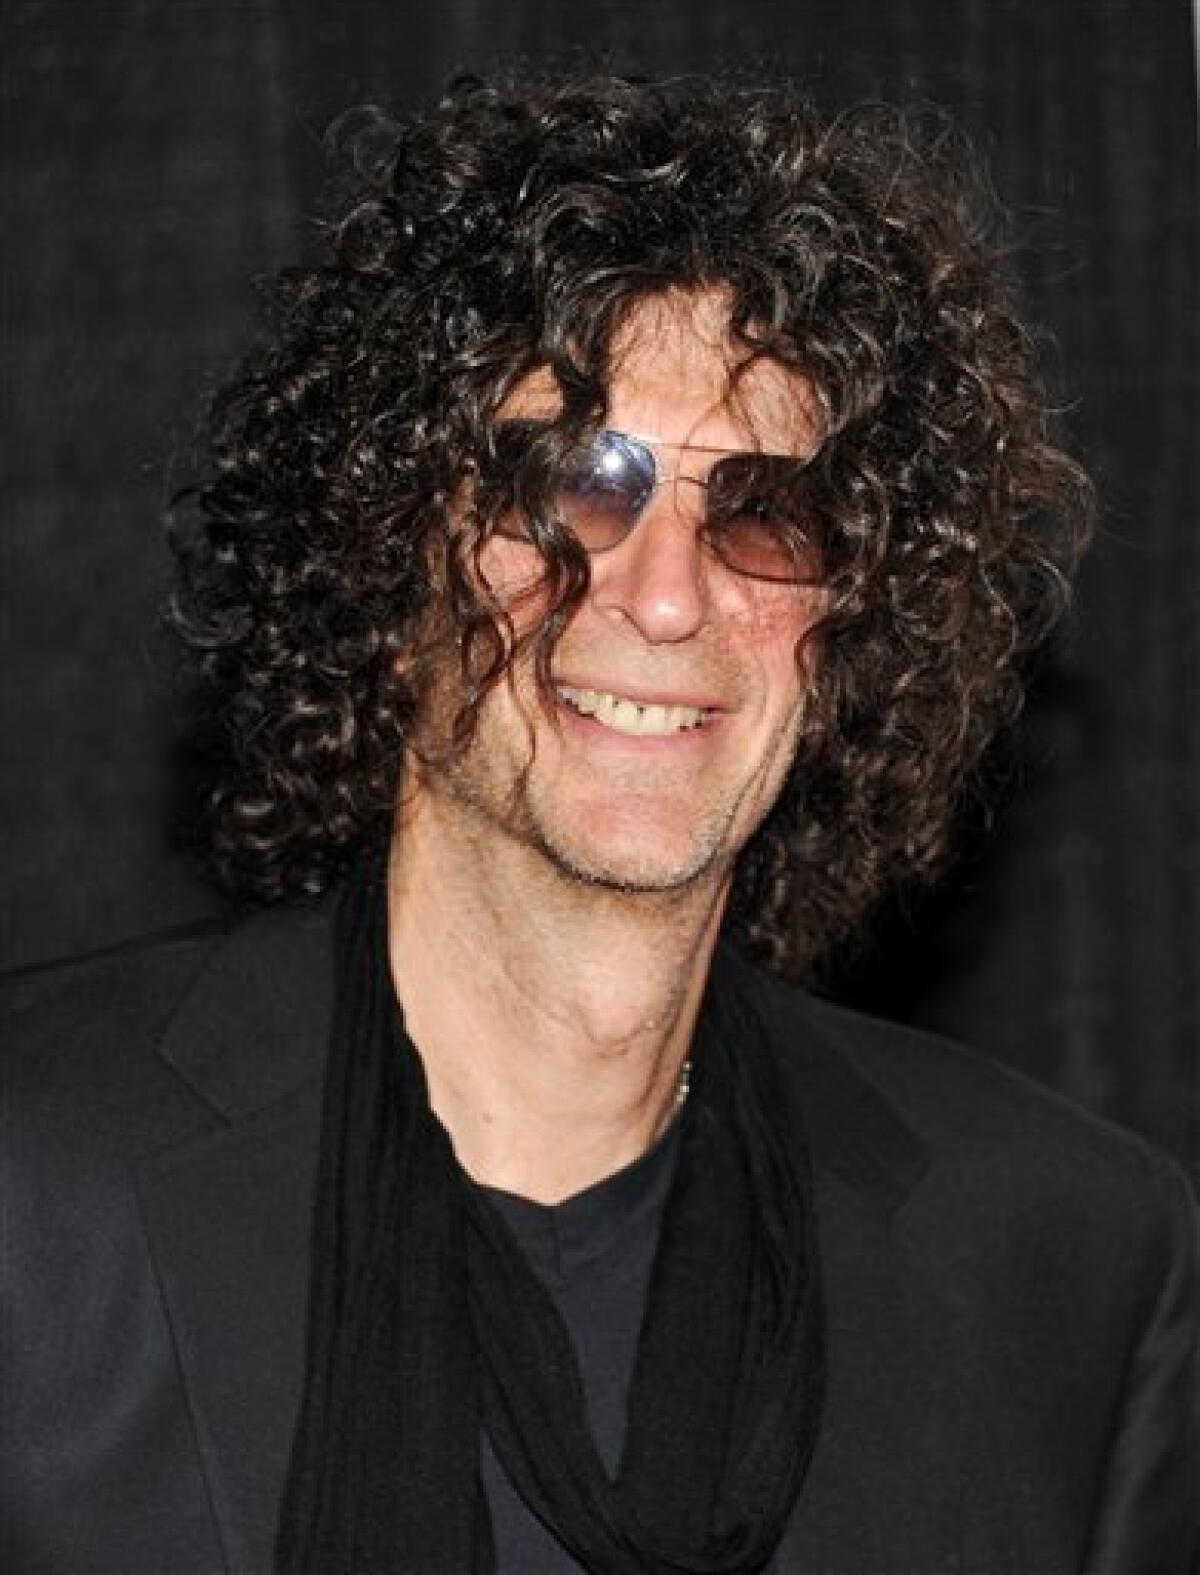 FILE - In a Dec. 1, 2010 file photo, Howard Stern attends the Quentin Tarantino Friars Club Roast at the New York Hilton Hotel in New York. Stern will be joining the judges' panel on "America's Got Talent," and the NBC summer talent show will uproot itself from Los Angeles to accommodate the New York-based shock jock, the network said Thursday. Stern, whose daily radio show airs on Sirius XM, is replacing Piers Morgan, who departed "Talent" after last season to free up his busy schedule. (AP Photo/Evan Agostini)